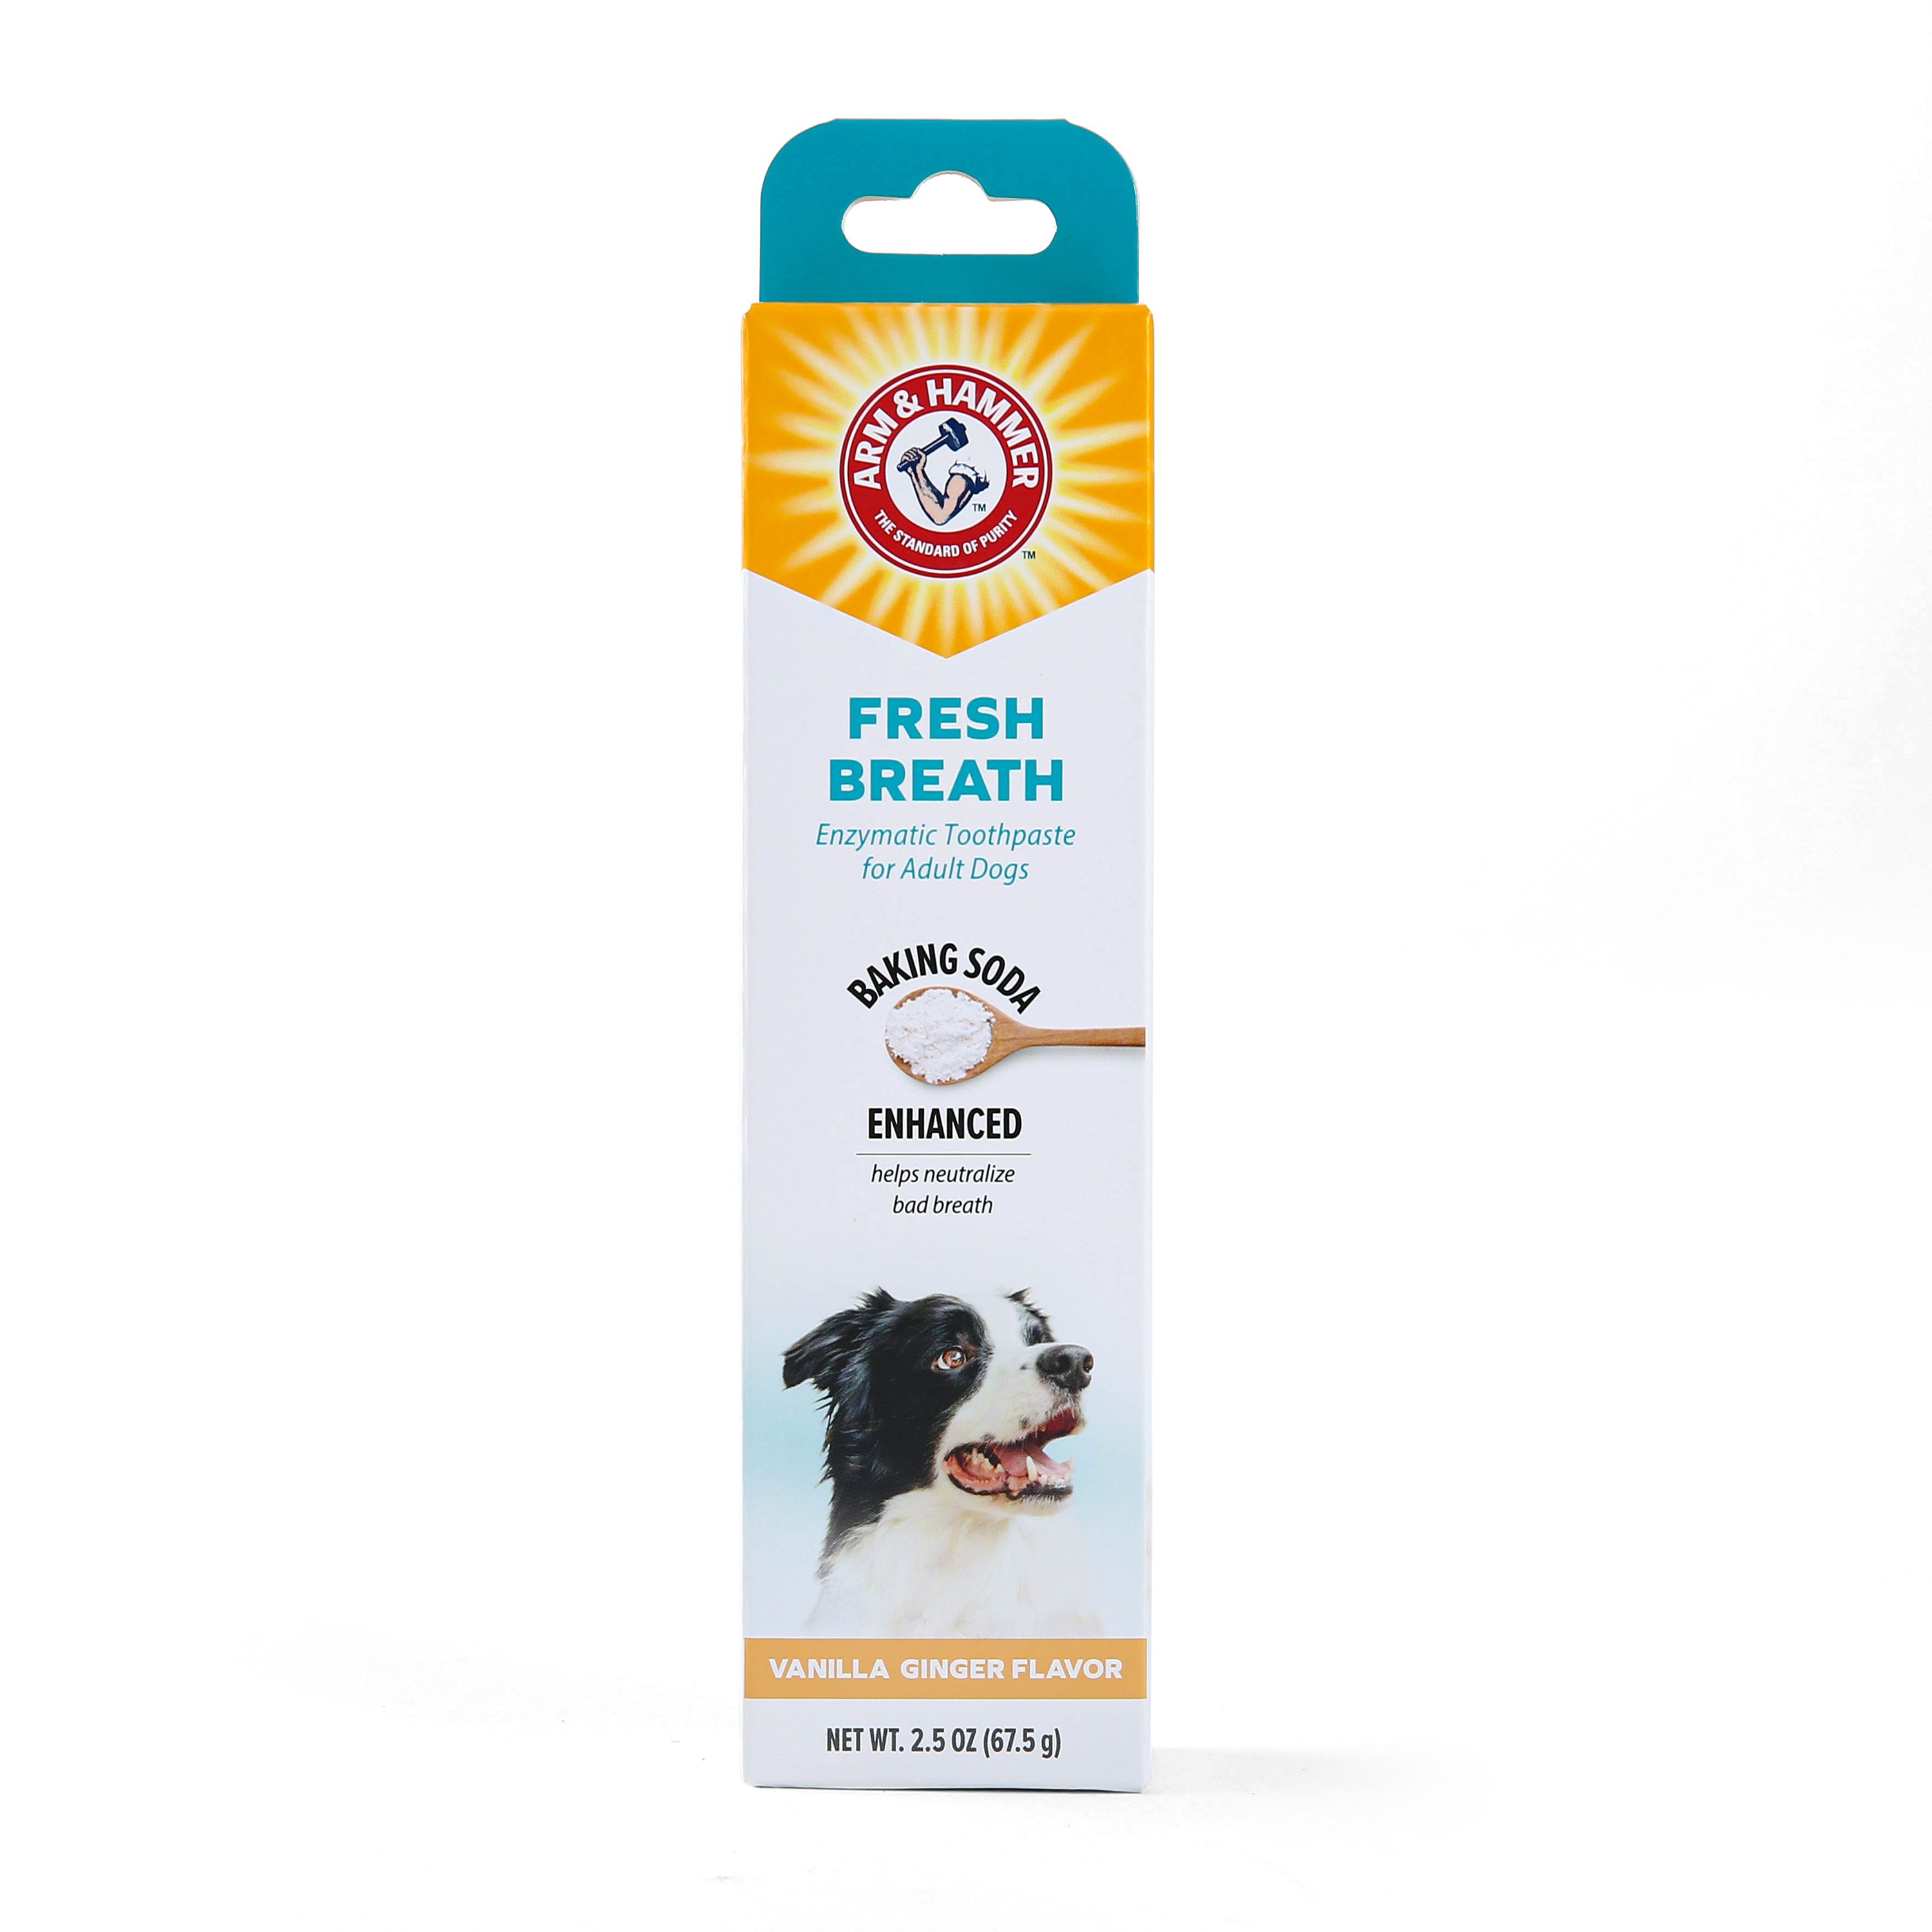 regular toothpaste for dogs